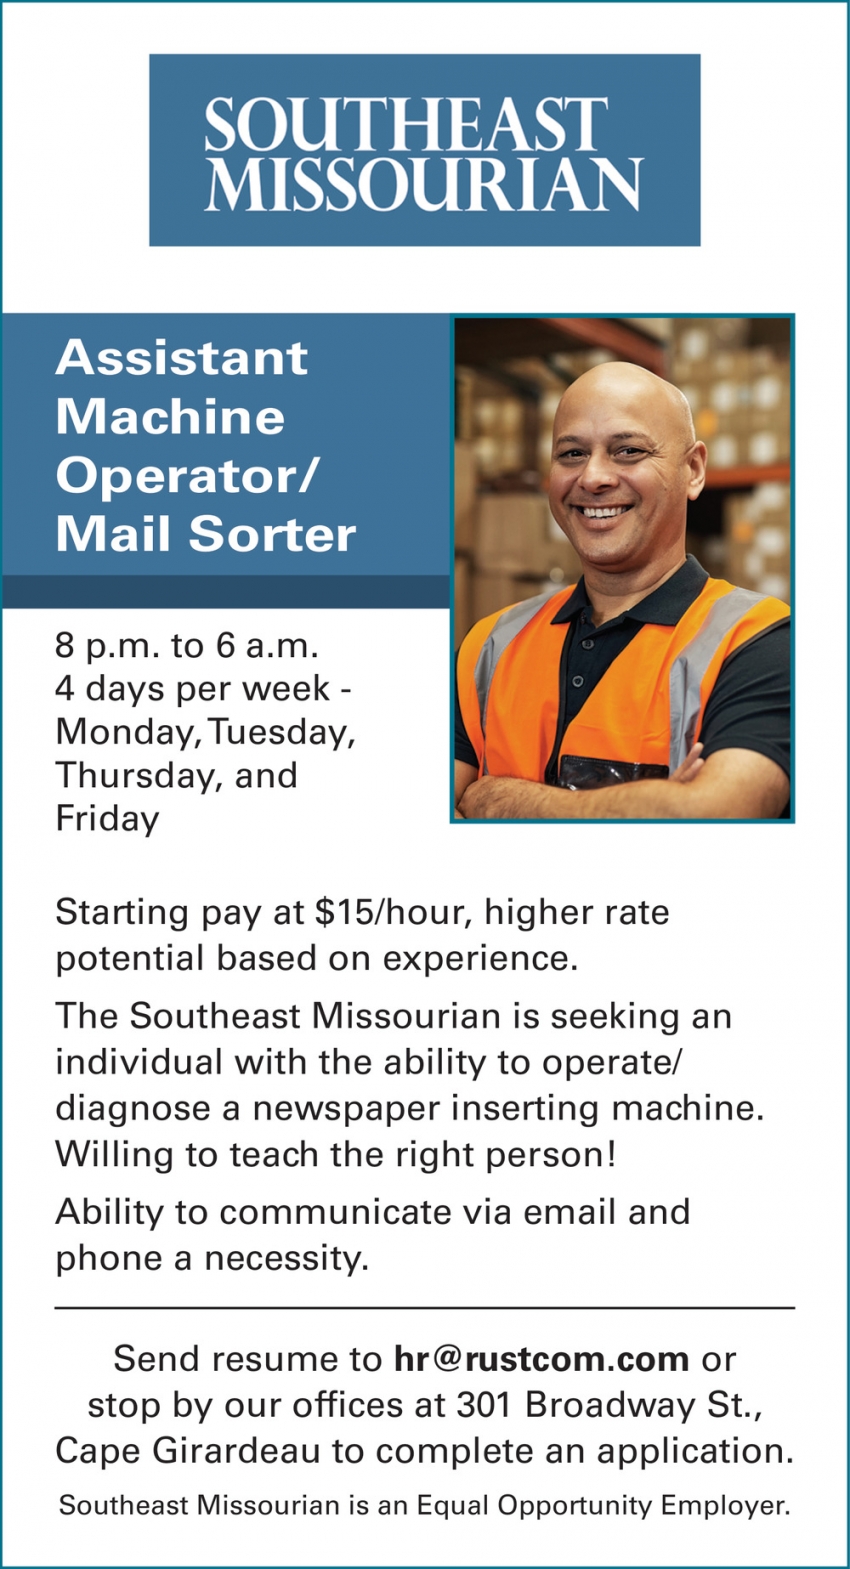 Assistant Machine Operator/Mail Sorter